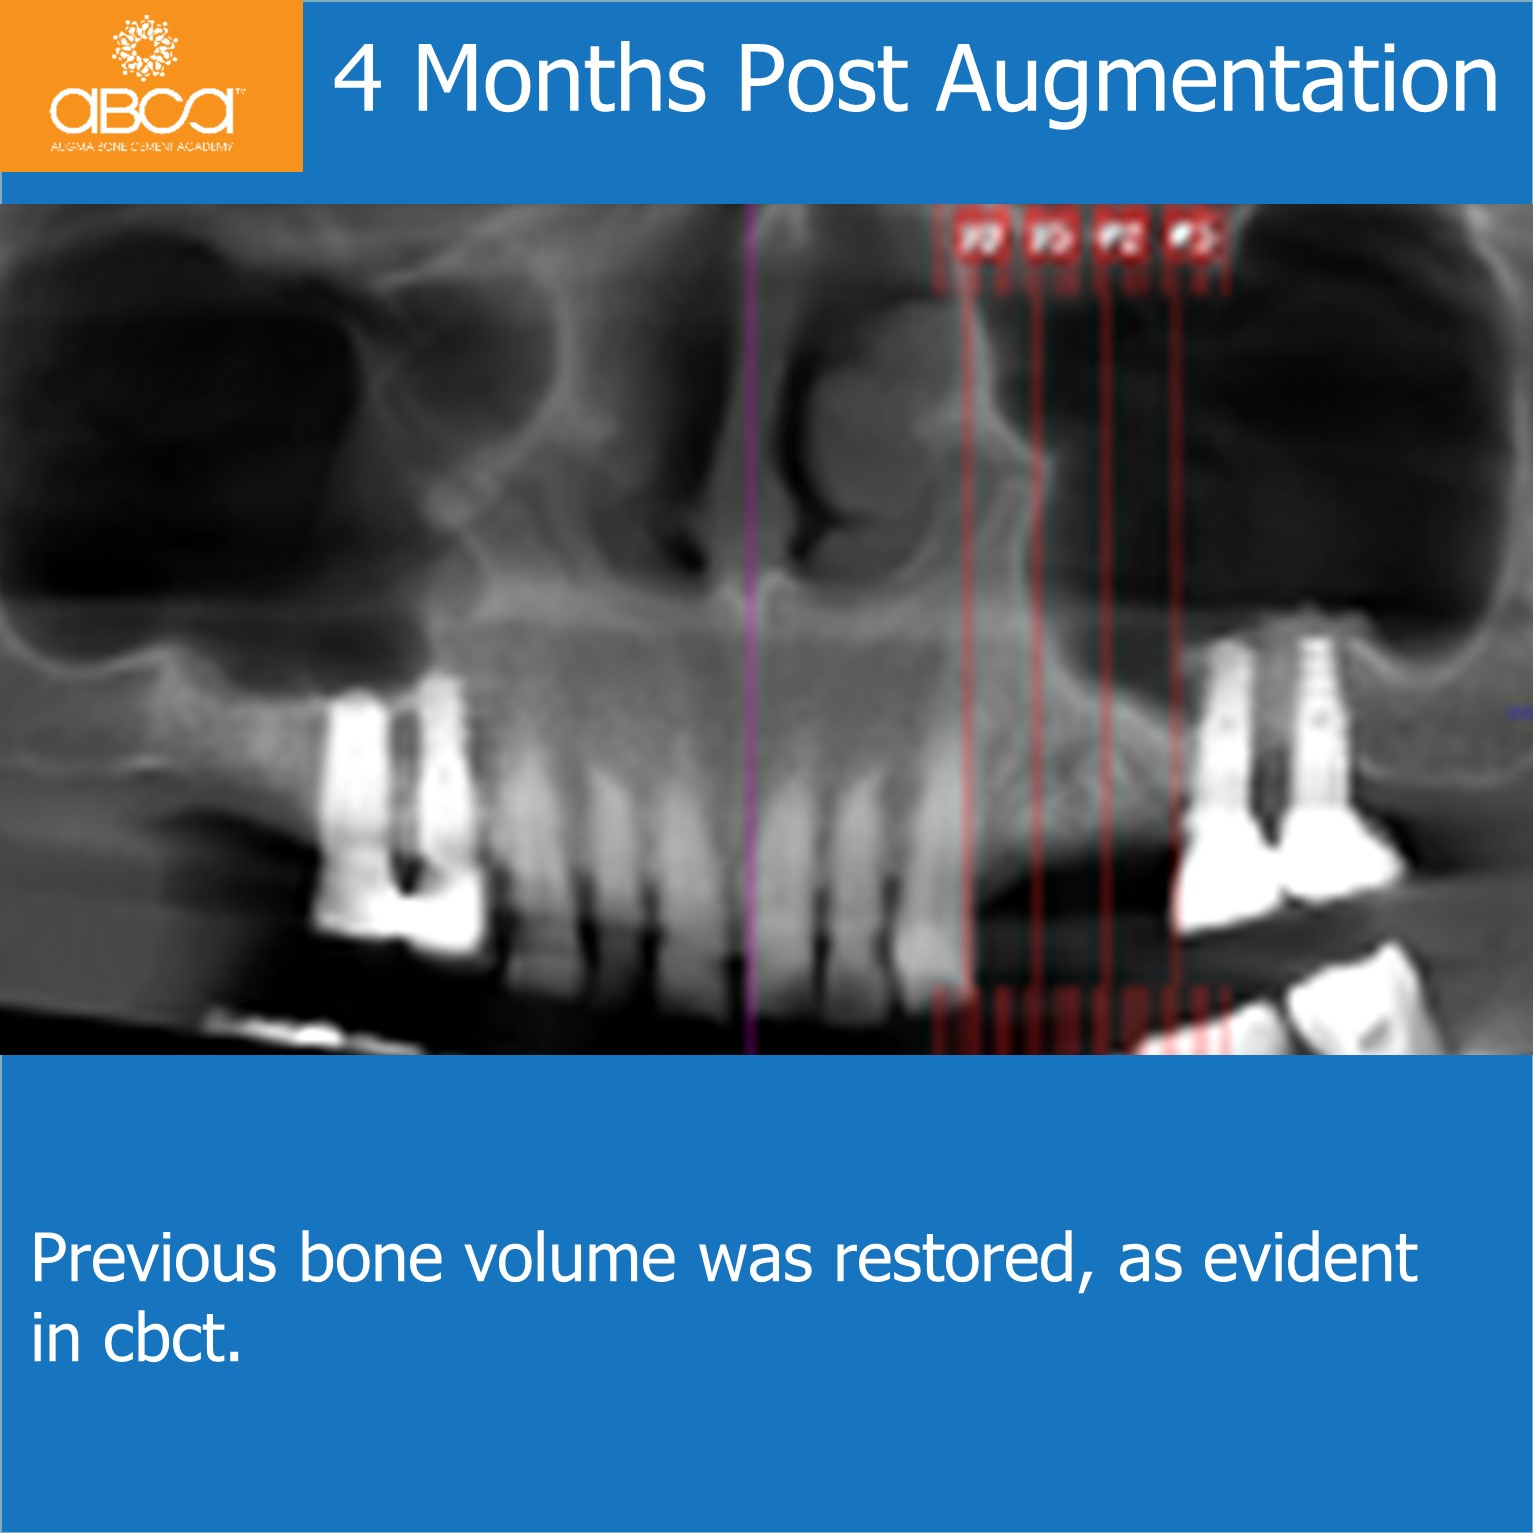 4 Months Post Augmentation - Previous bone volume was restored, as evident in cbct